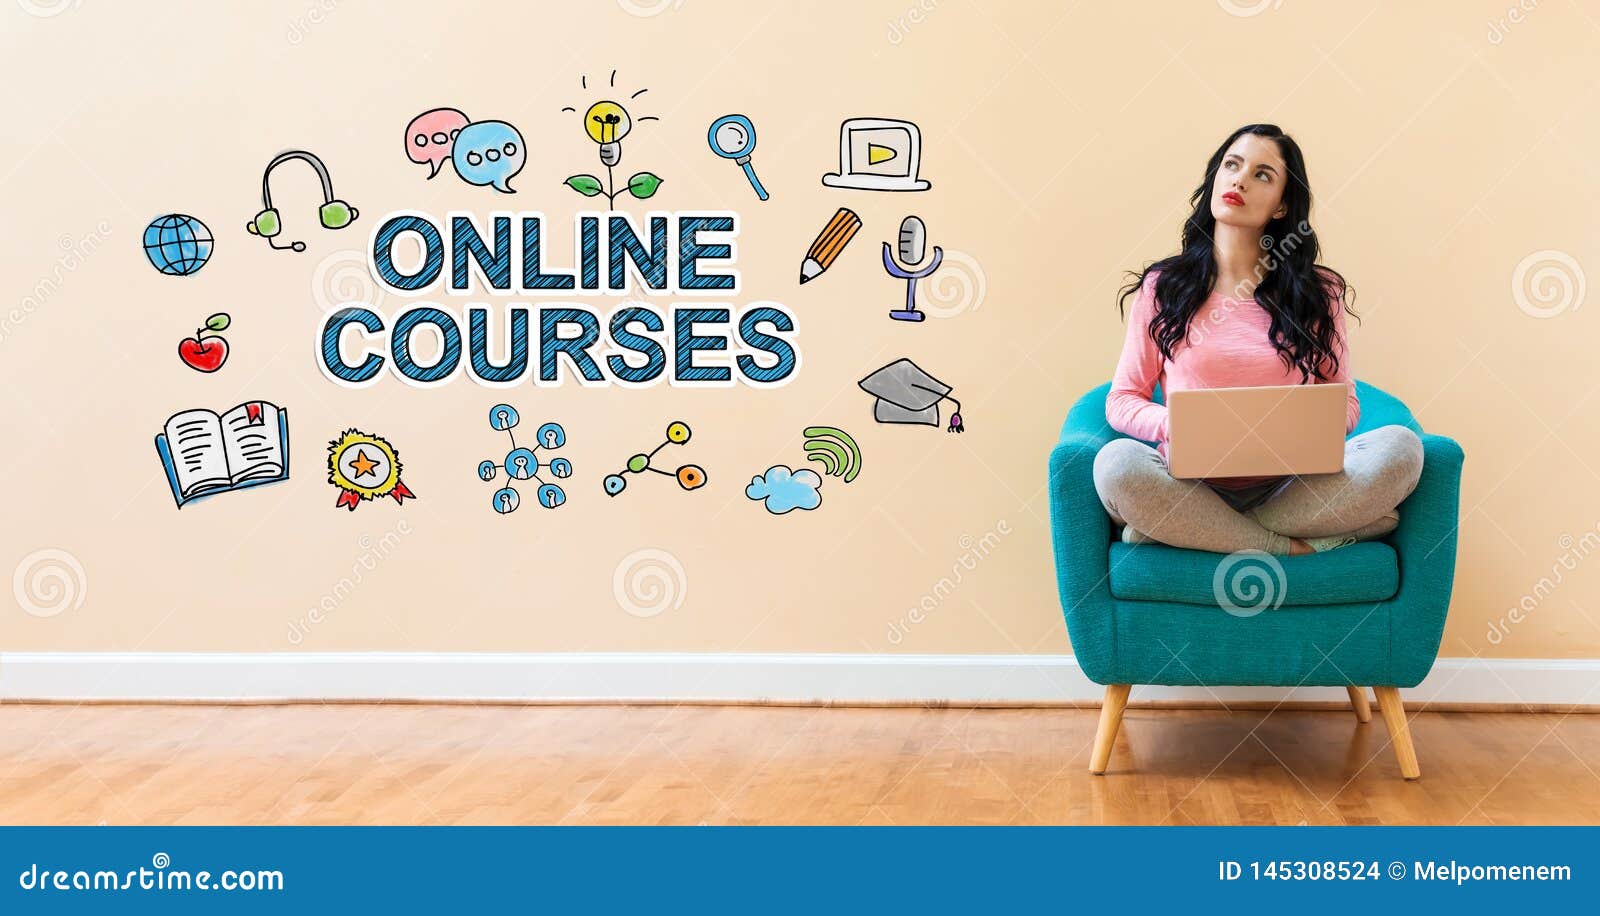 online courses  with woman using a laptop